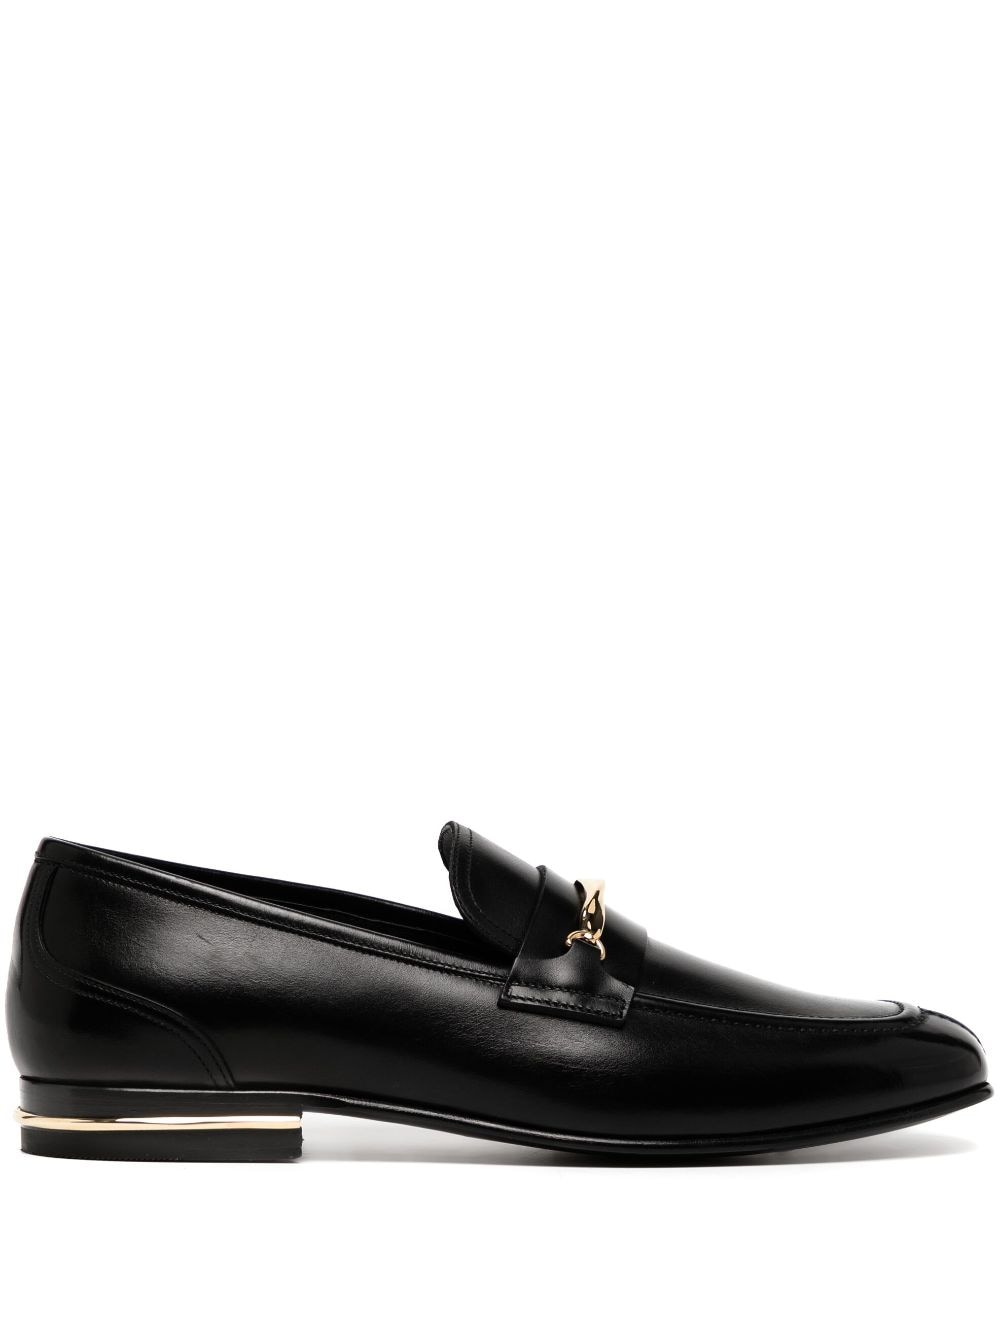 Bally Suisse Leather Loafers - Farfetch